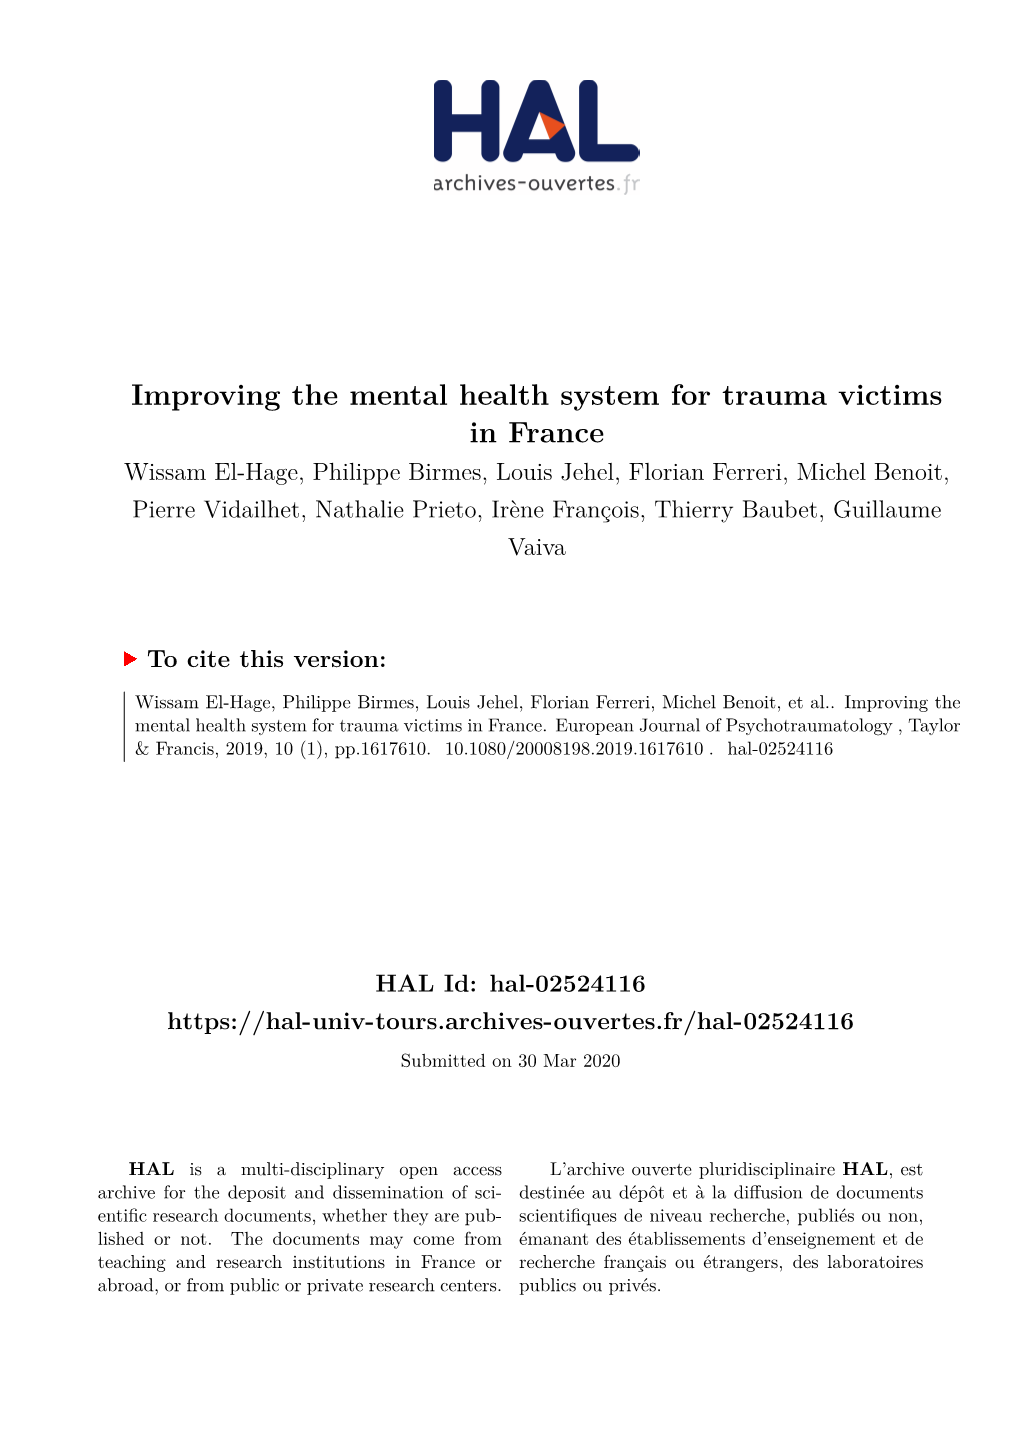 Improving the Mental Health System for Trauma Victims in France